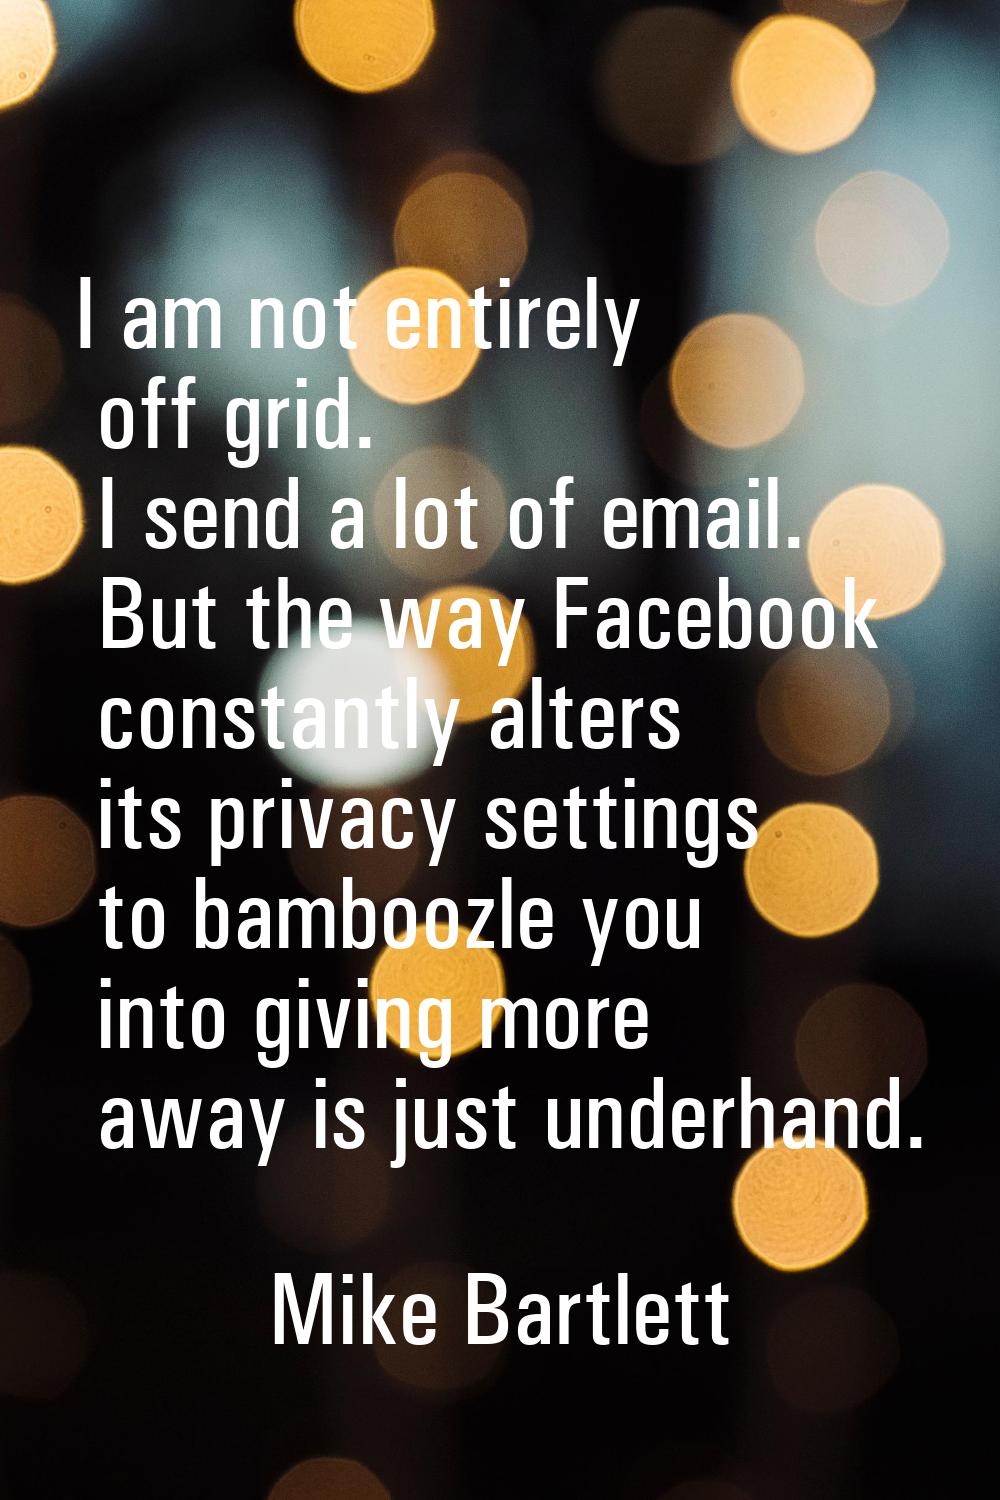 I am not entirely off grid. I send a lot of email. But the way Facebook constantly alters its priva